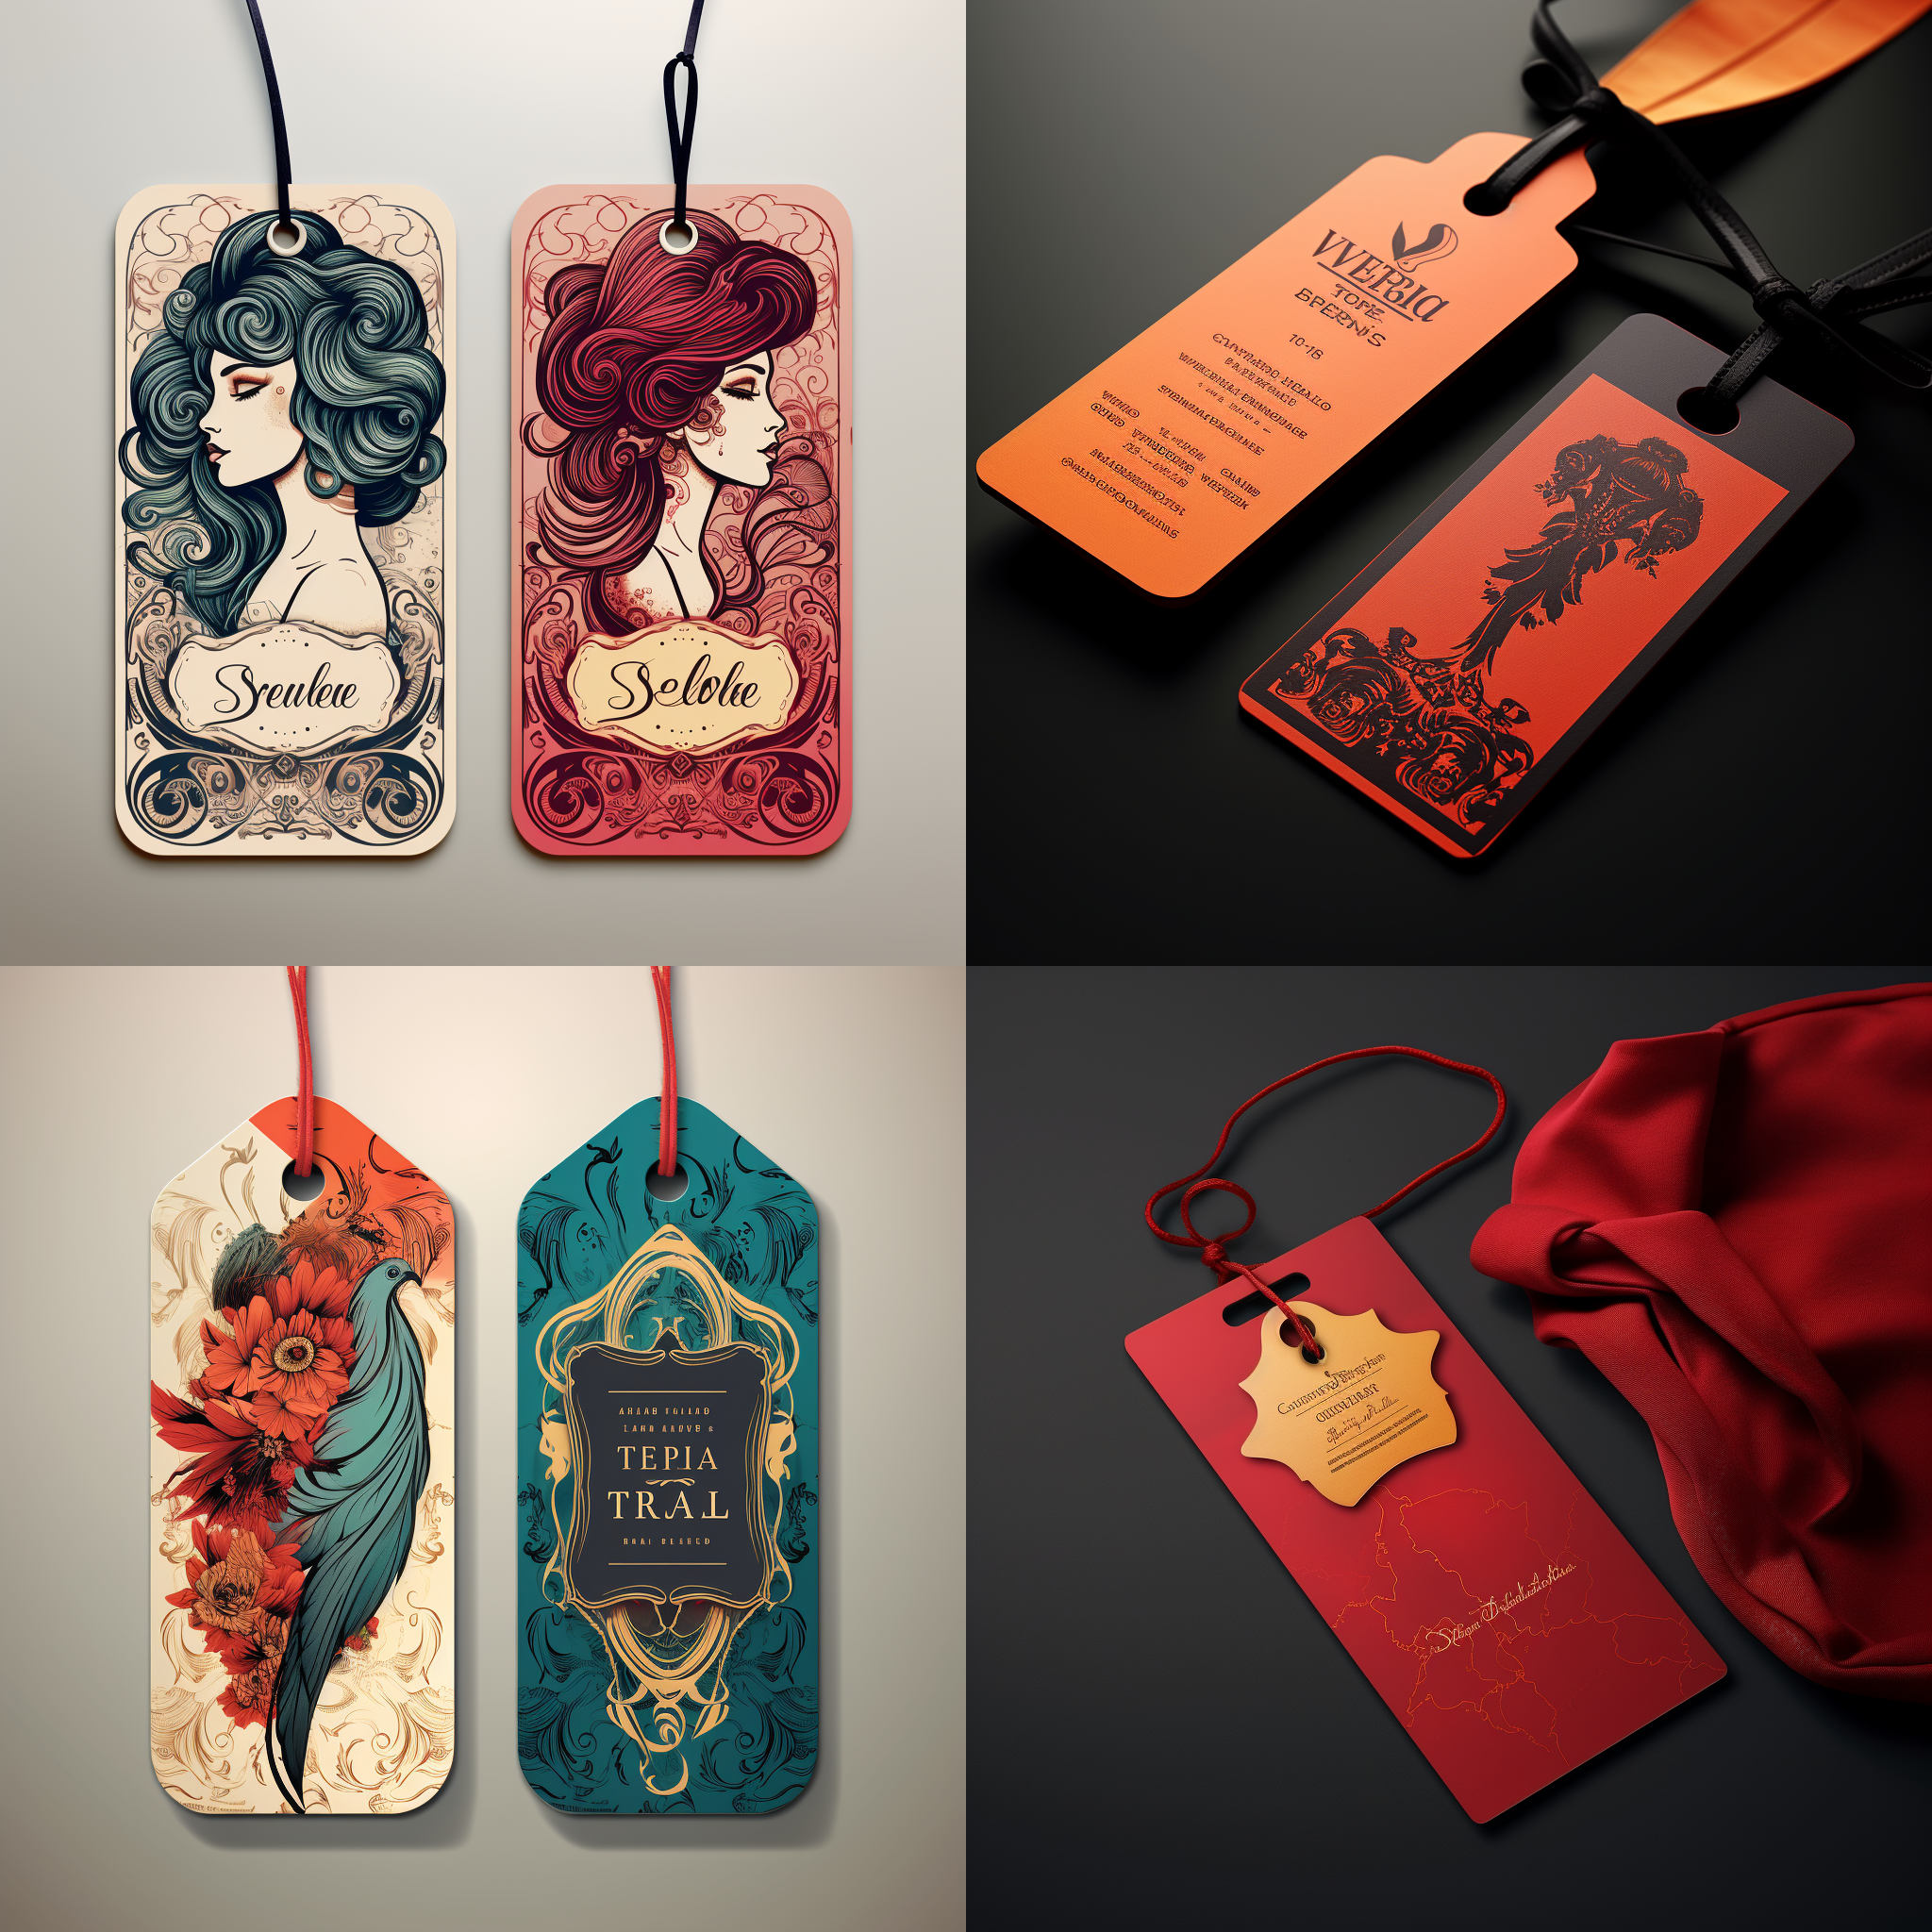 Customizable Hang Tags: Your Brand's Signature Style within Reach